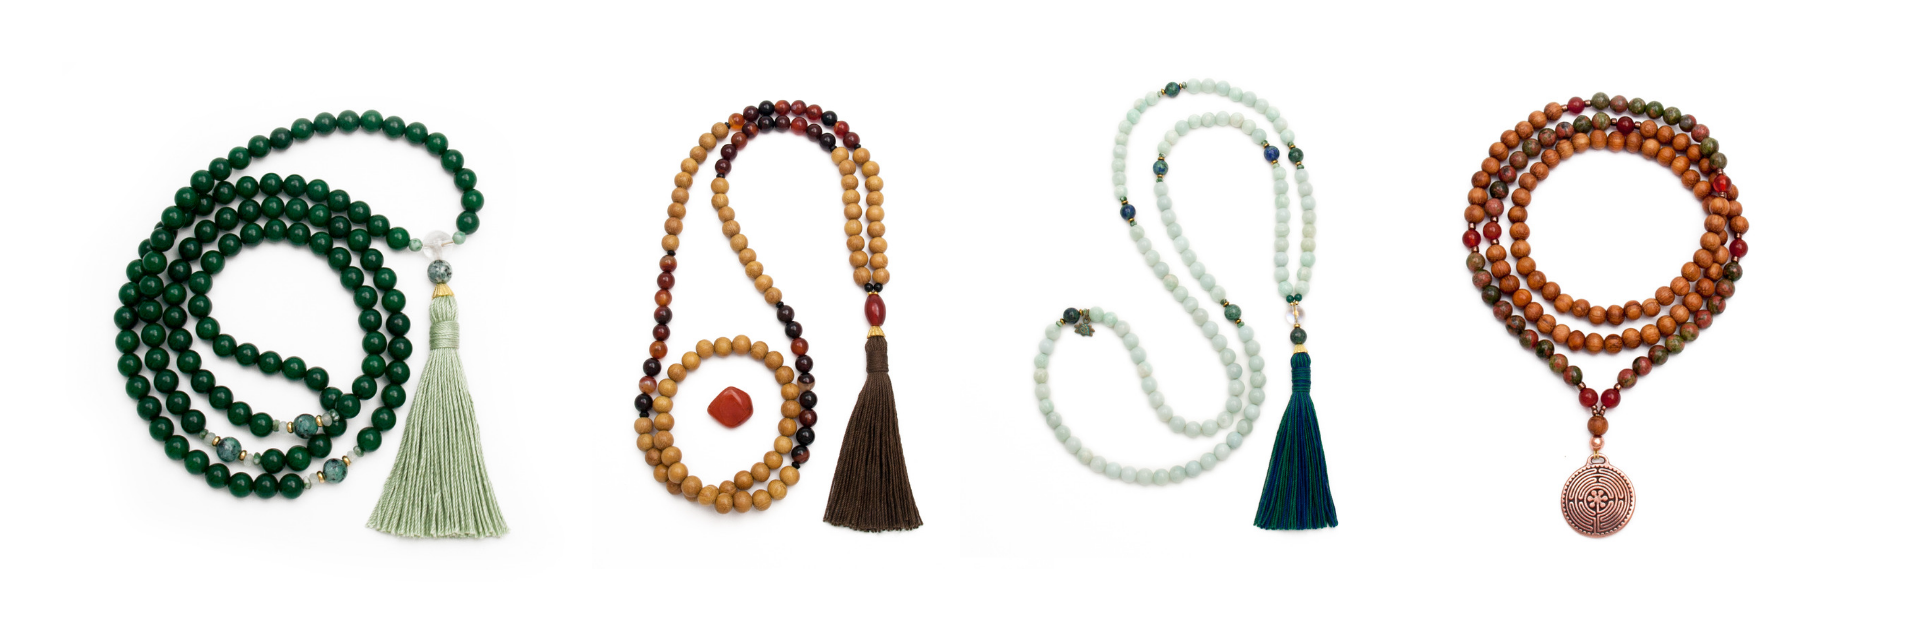 Different Types of Mala Beads